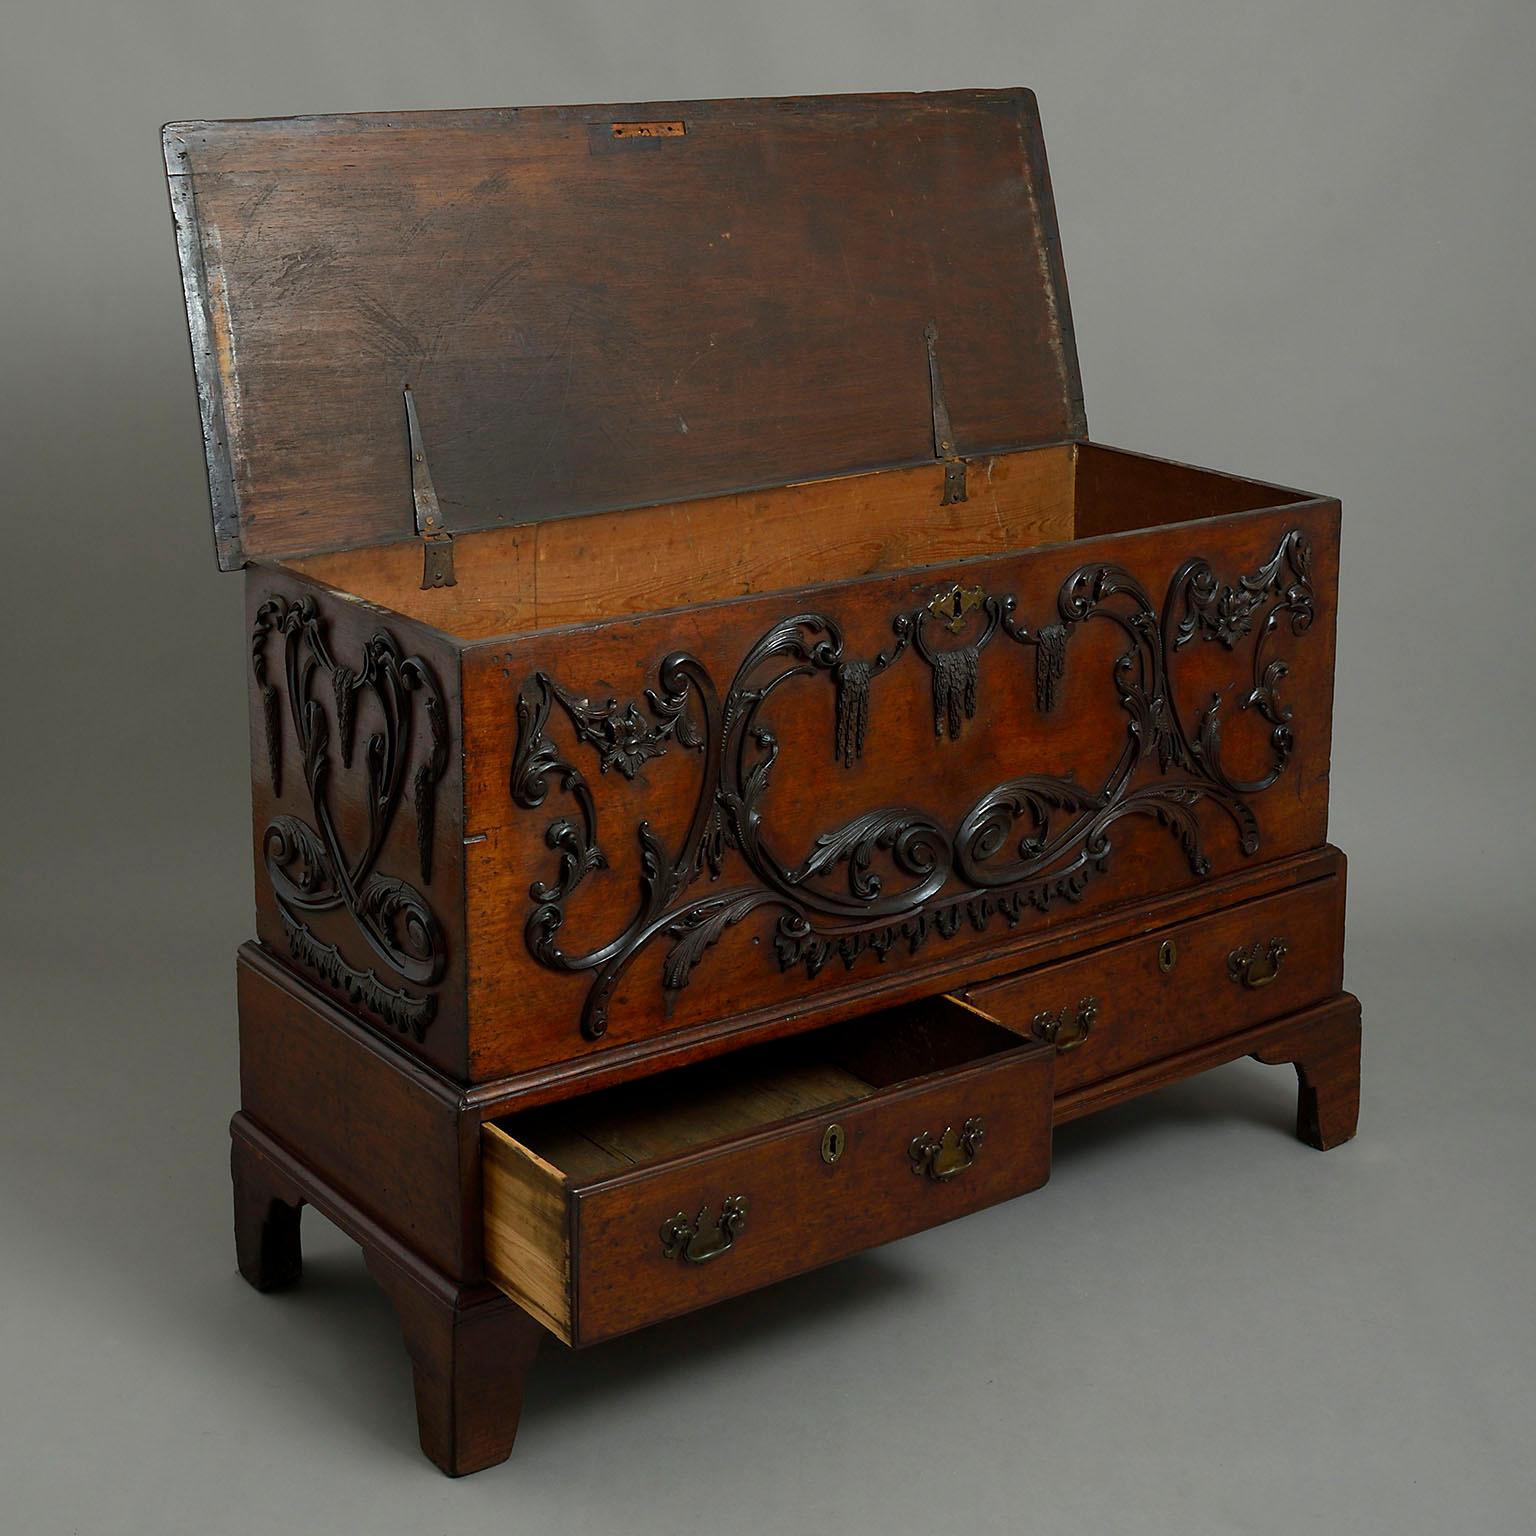 Rococo Mid-18th Century George III Mahogany Mule Chest or Blanket Chest